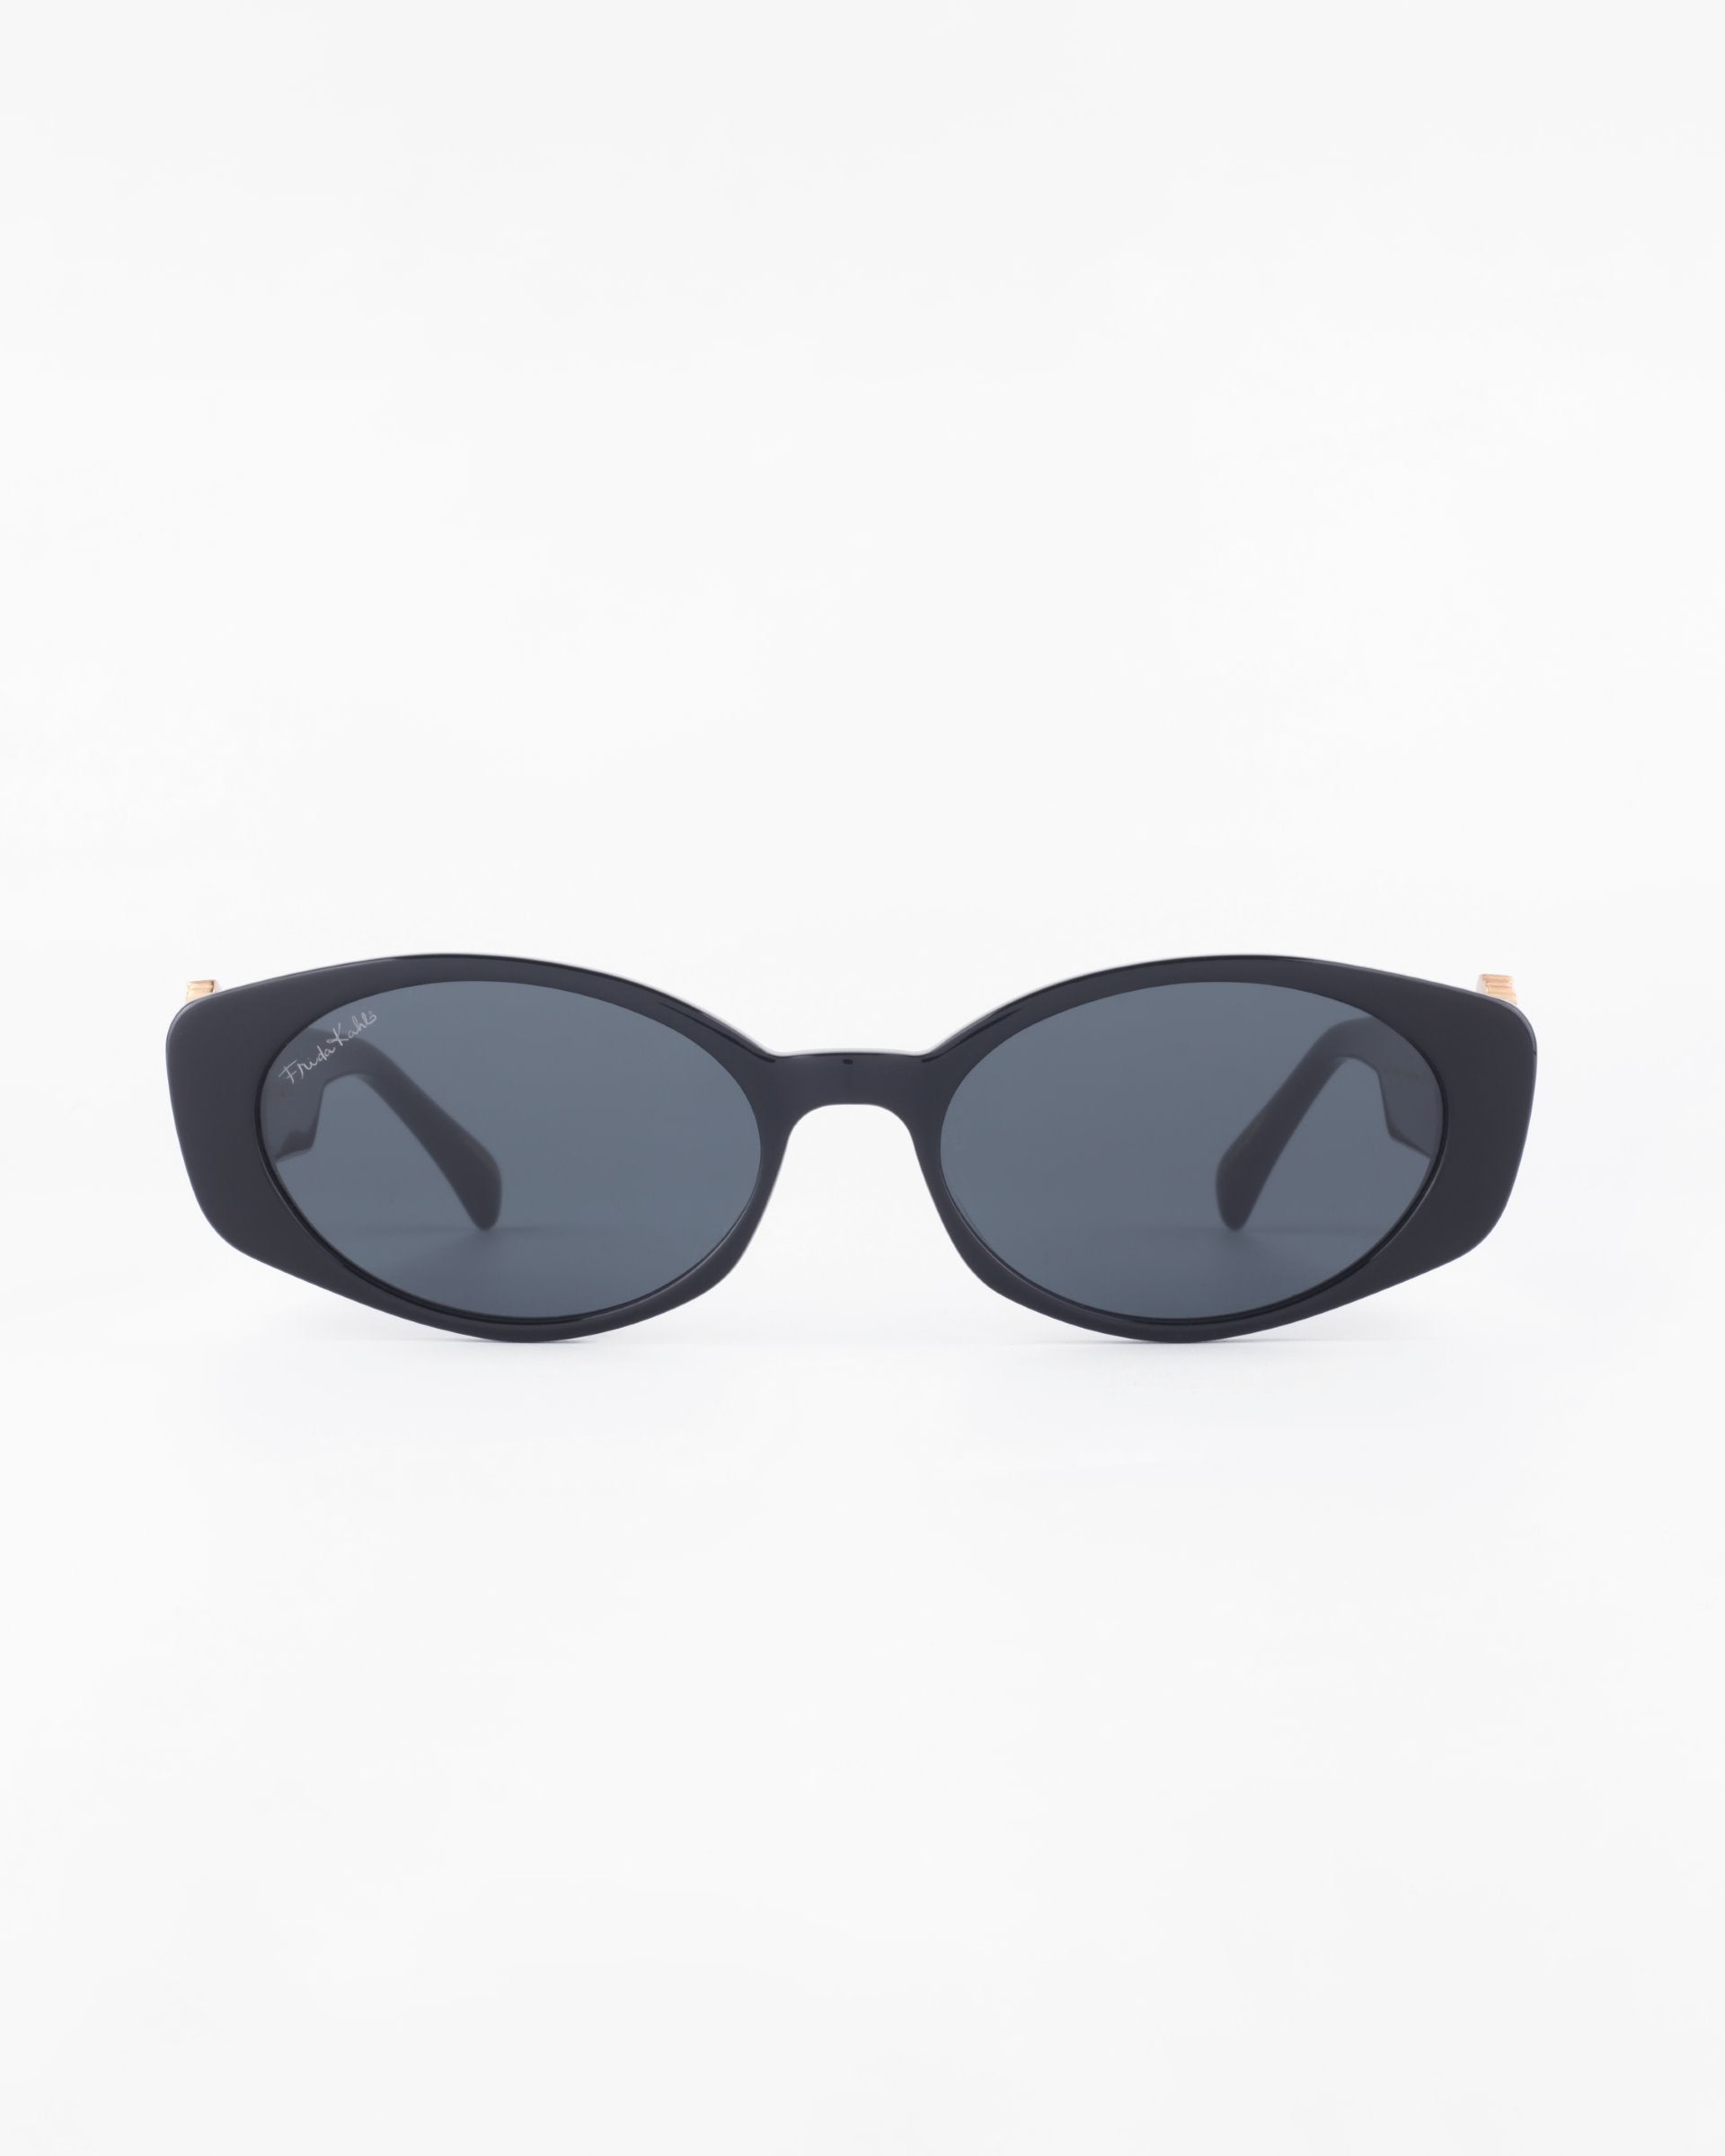 A pair of black oval-shaped Frida Portrait sunglasses by For Art&#39;s Sake® with dark tinted, ultra-lightweight nylon lenses is centered on a white background. Both arms of the sunglasses are folded, and they offer 100% UVA &amp; UVB protection.